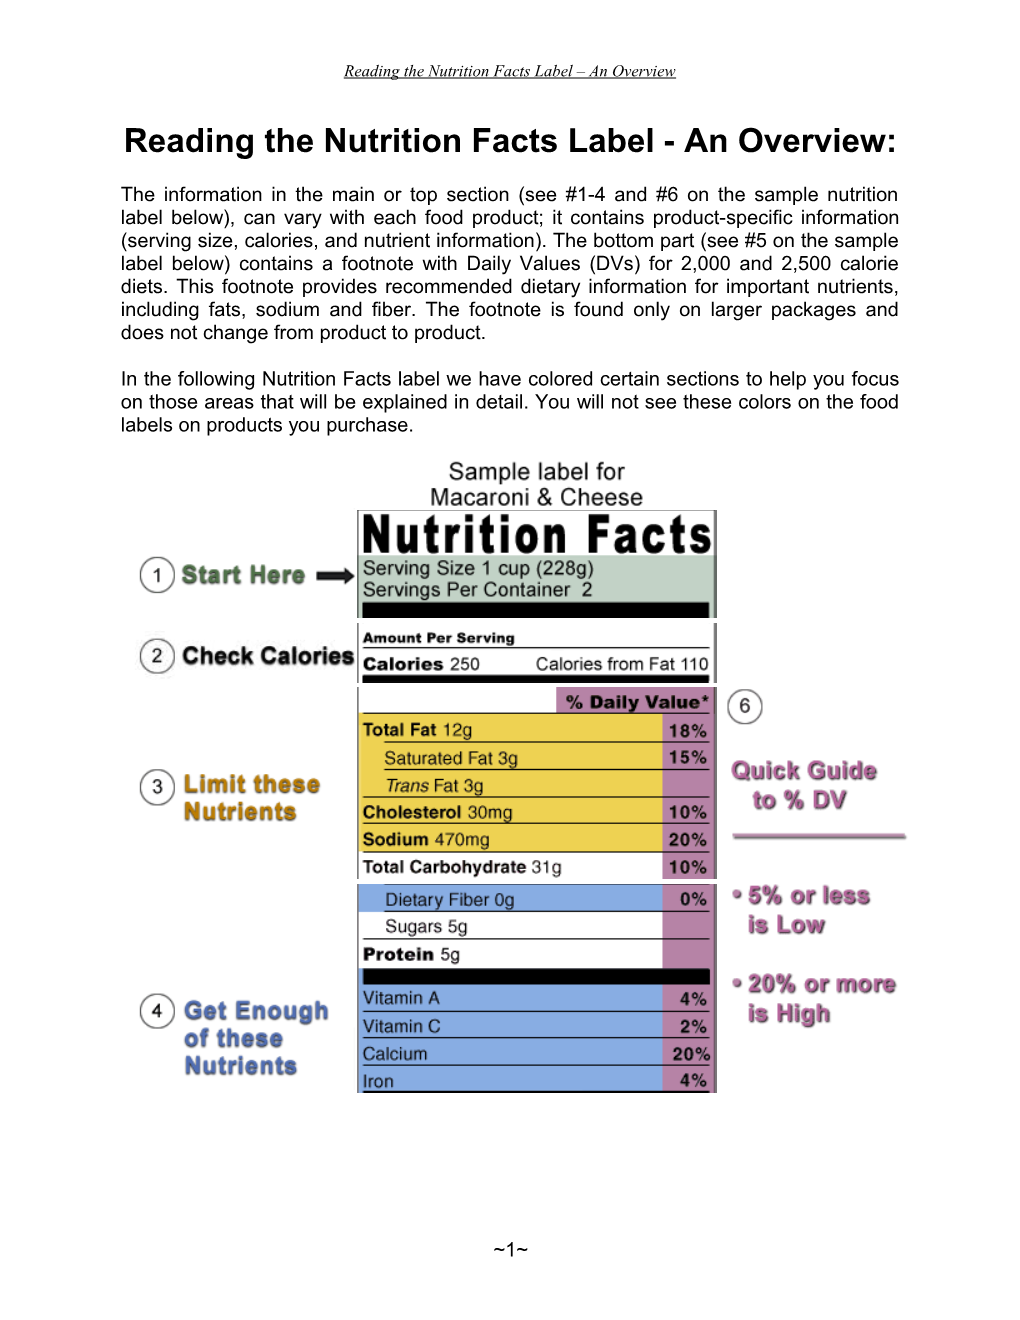 Reading the Nutrition Facts Label - an Overview